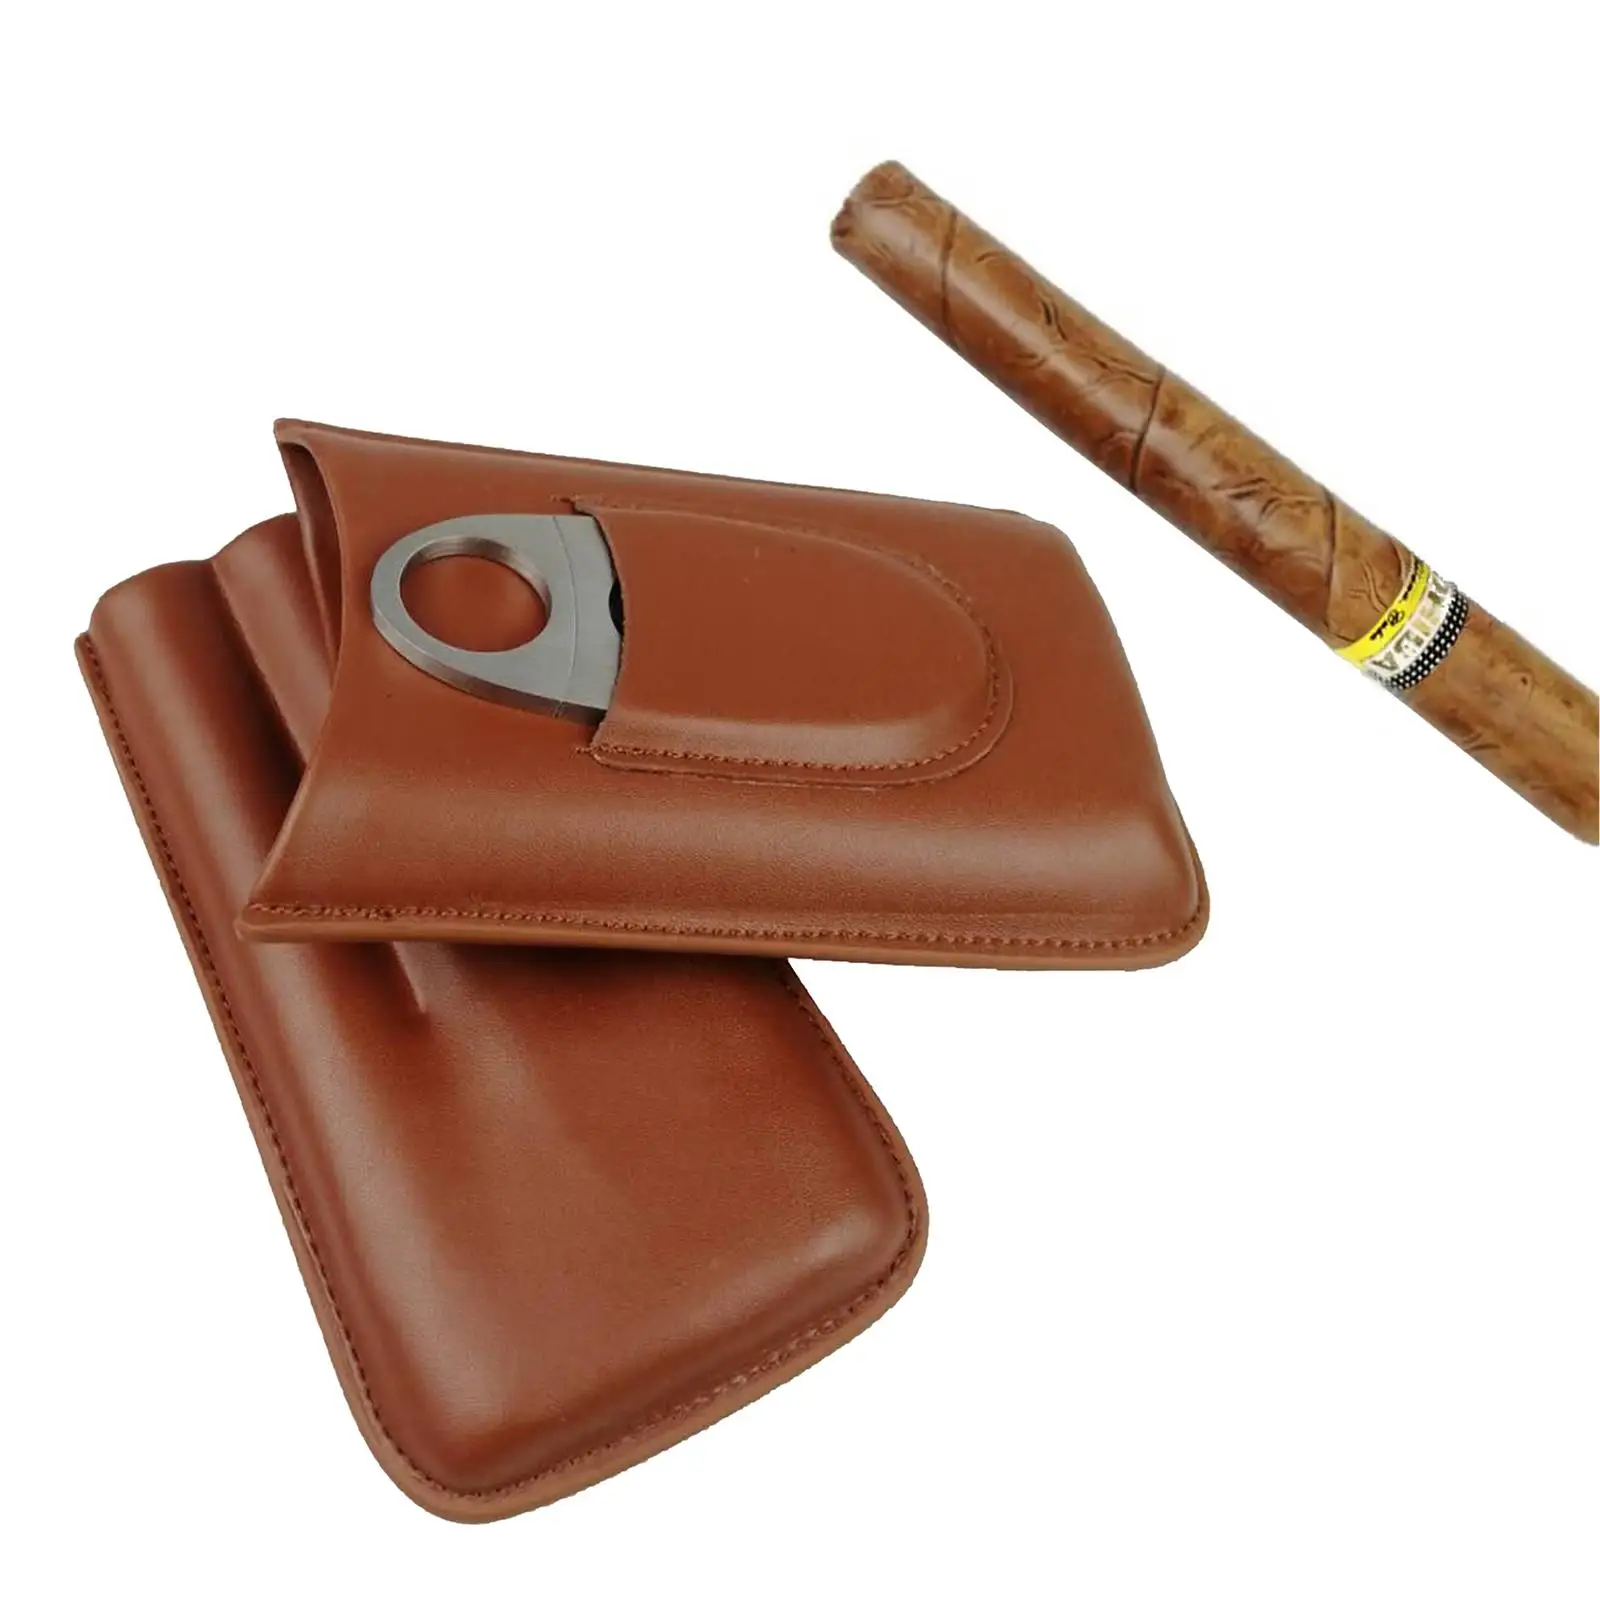 Portable Leather Case for Travel Cedar Wooden Humidors for Cigar Smokers 3 Tubes with Cigar Cutter (Brown)